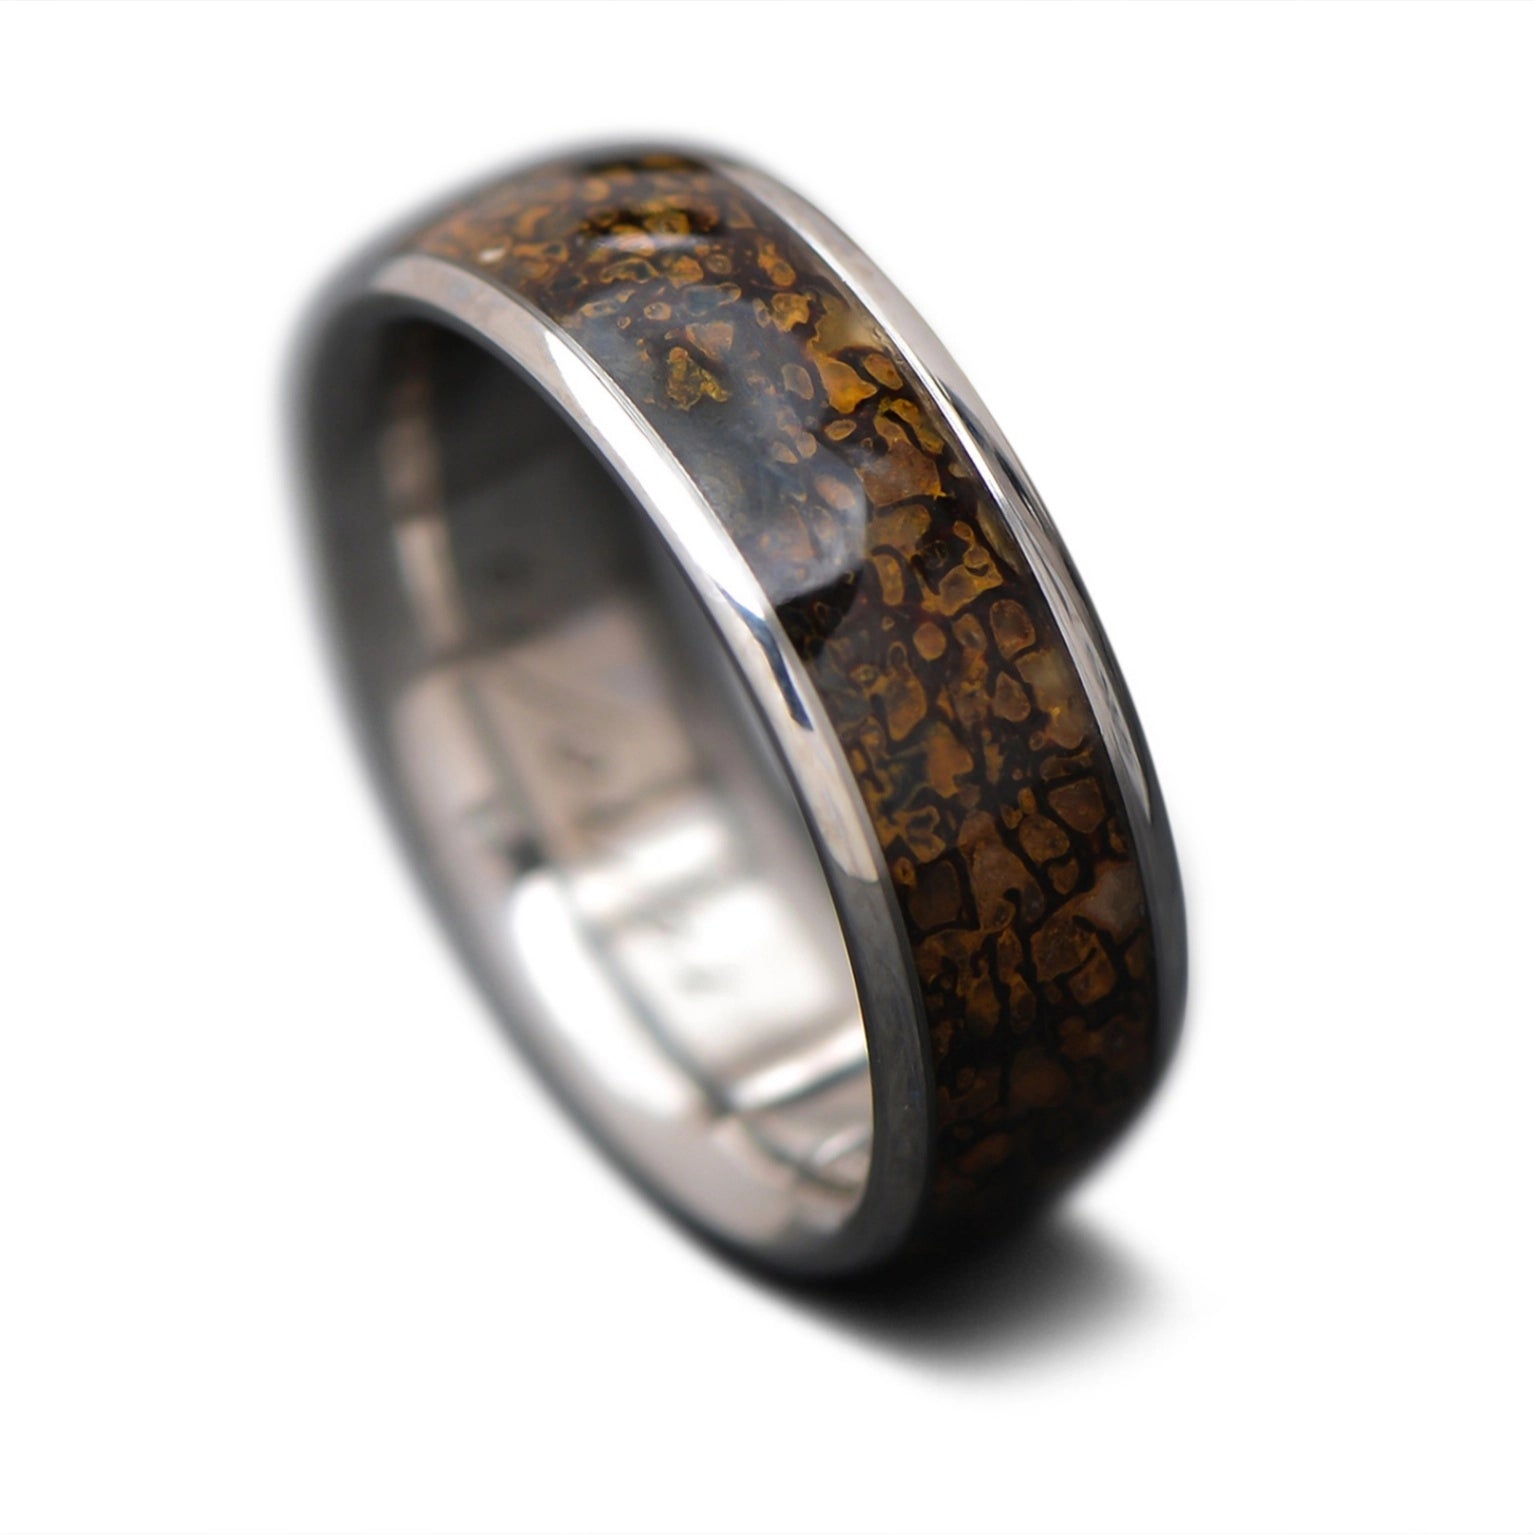  Titanium core ring with  Solid T-Rex inlay, 7mm -THE CORE